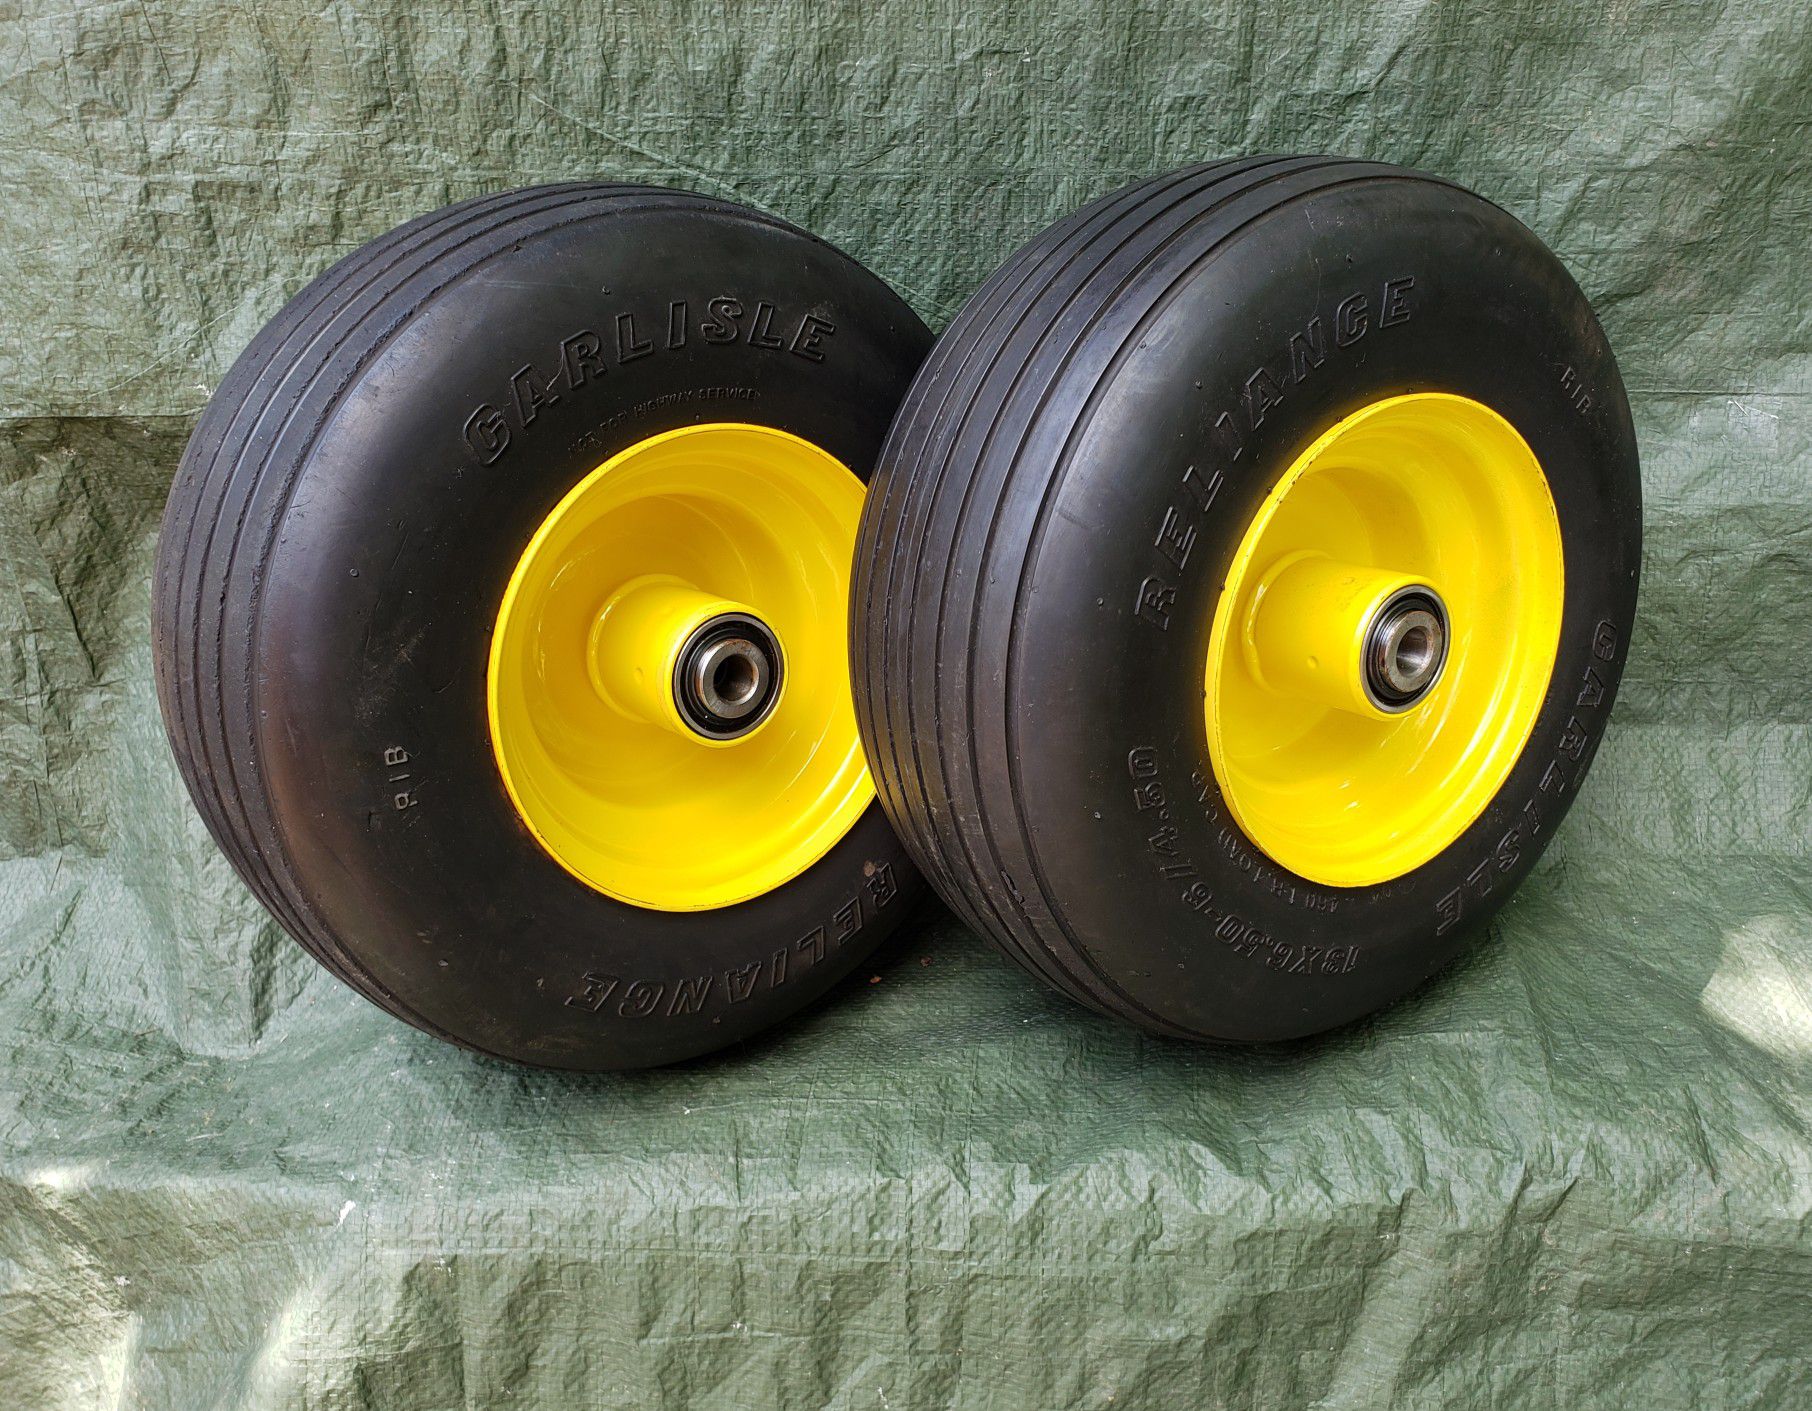 Pair of 13x6.50-6 Reliance Flat Free ribbed lawnmower tires on JD yellow wheels for zero turn mowers